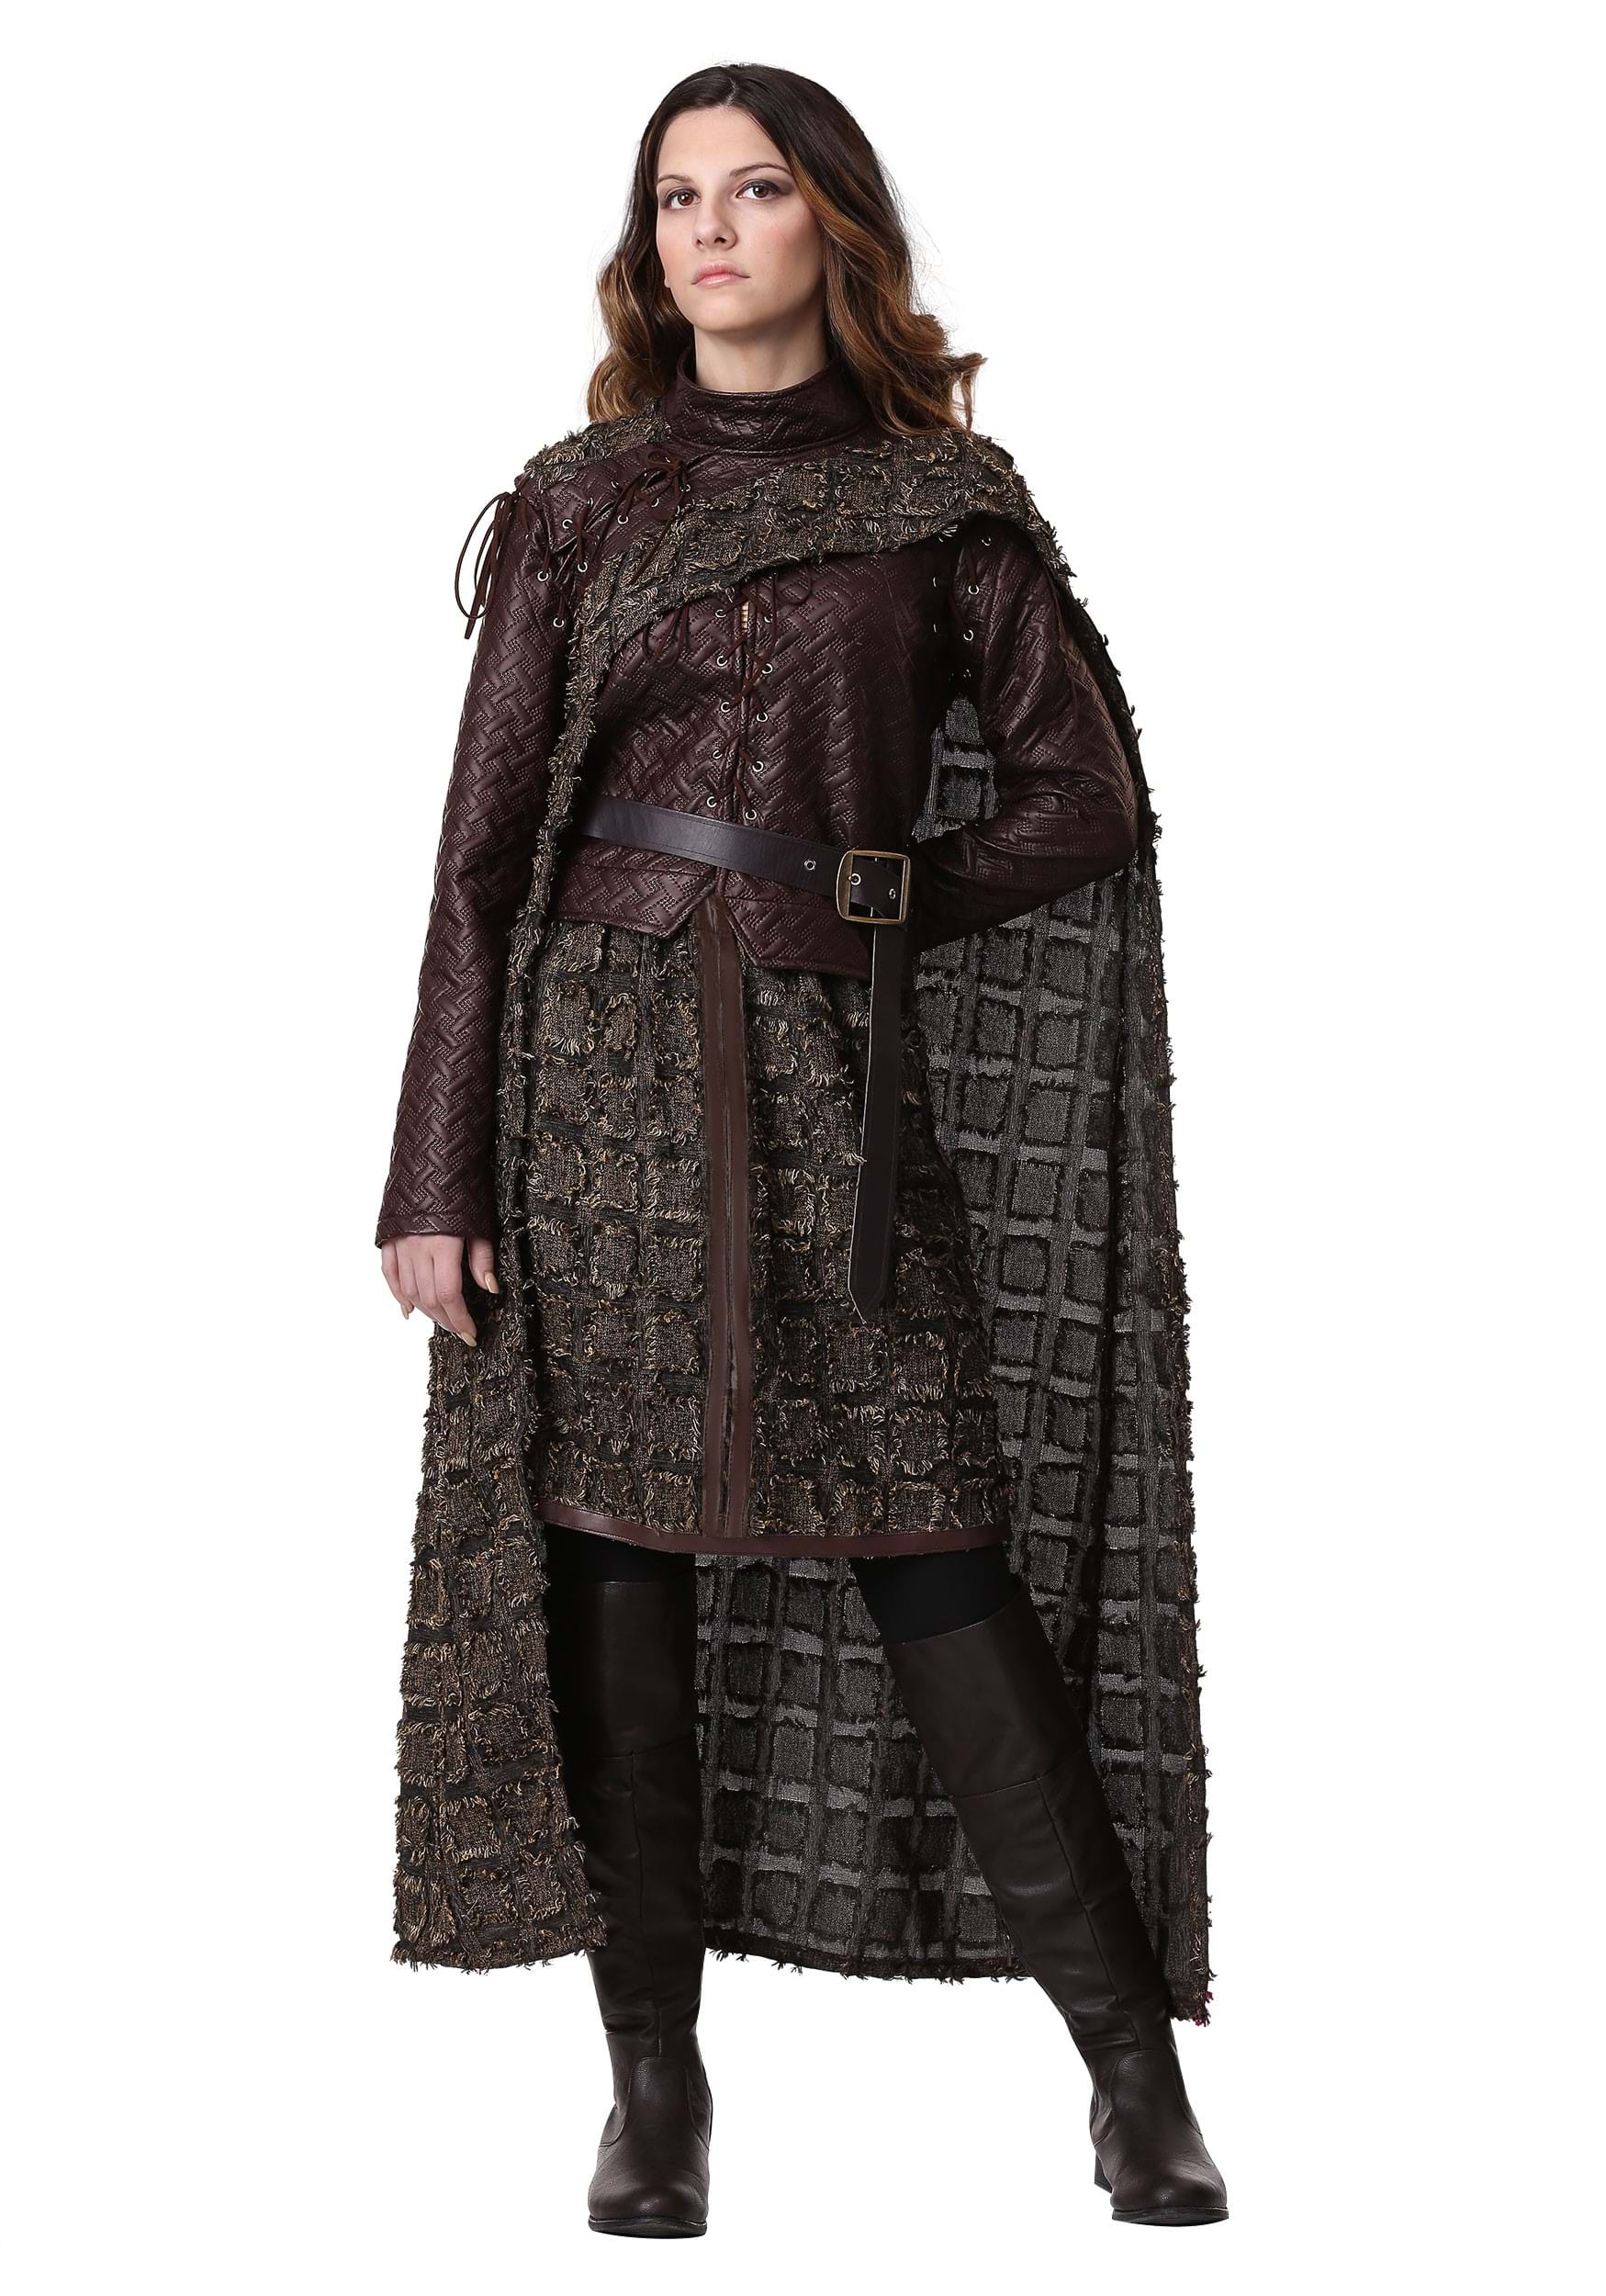 Image of Women's Winter Warrior Costume with Cape & Jacket ID FUN6363AD-S